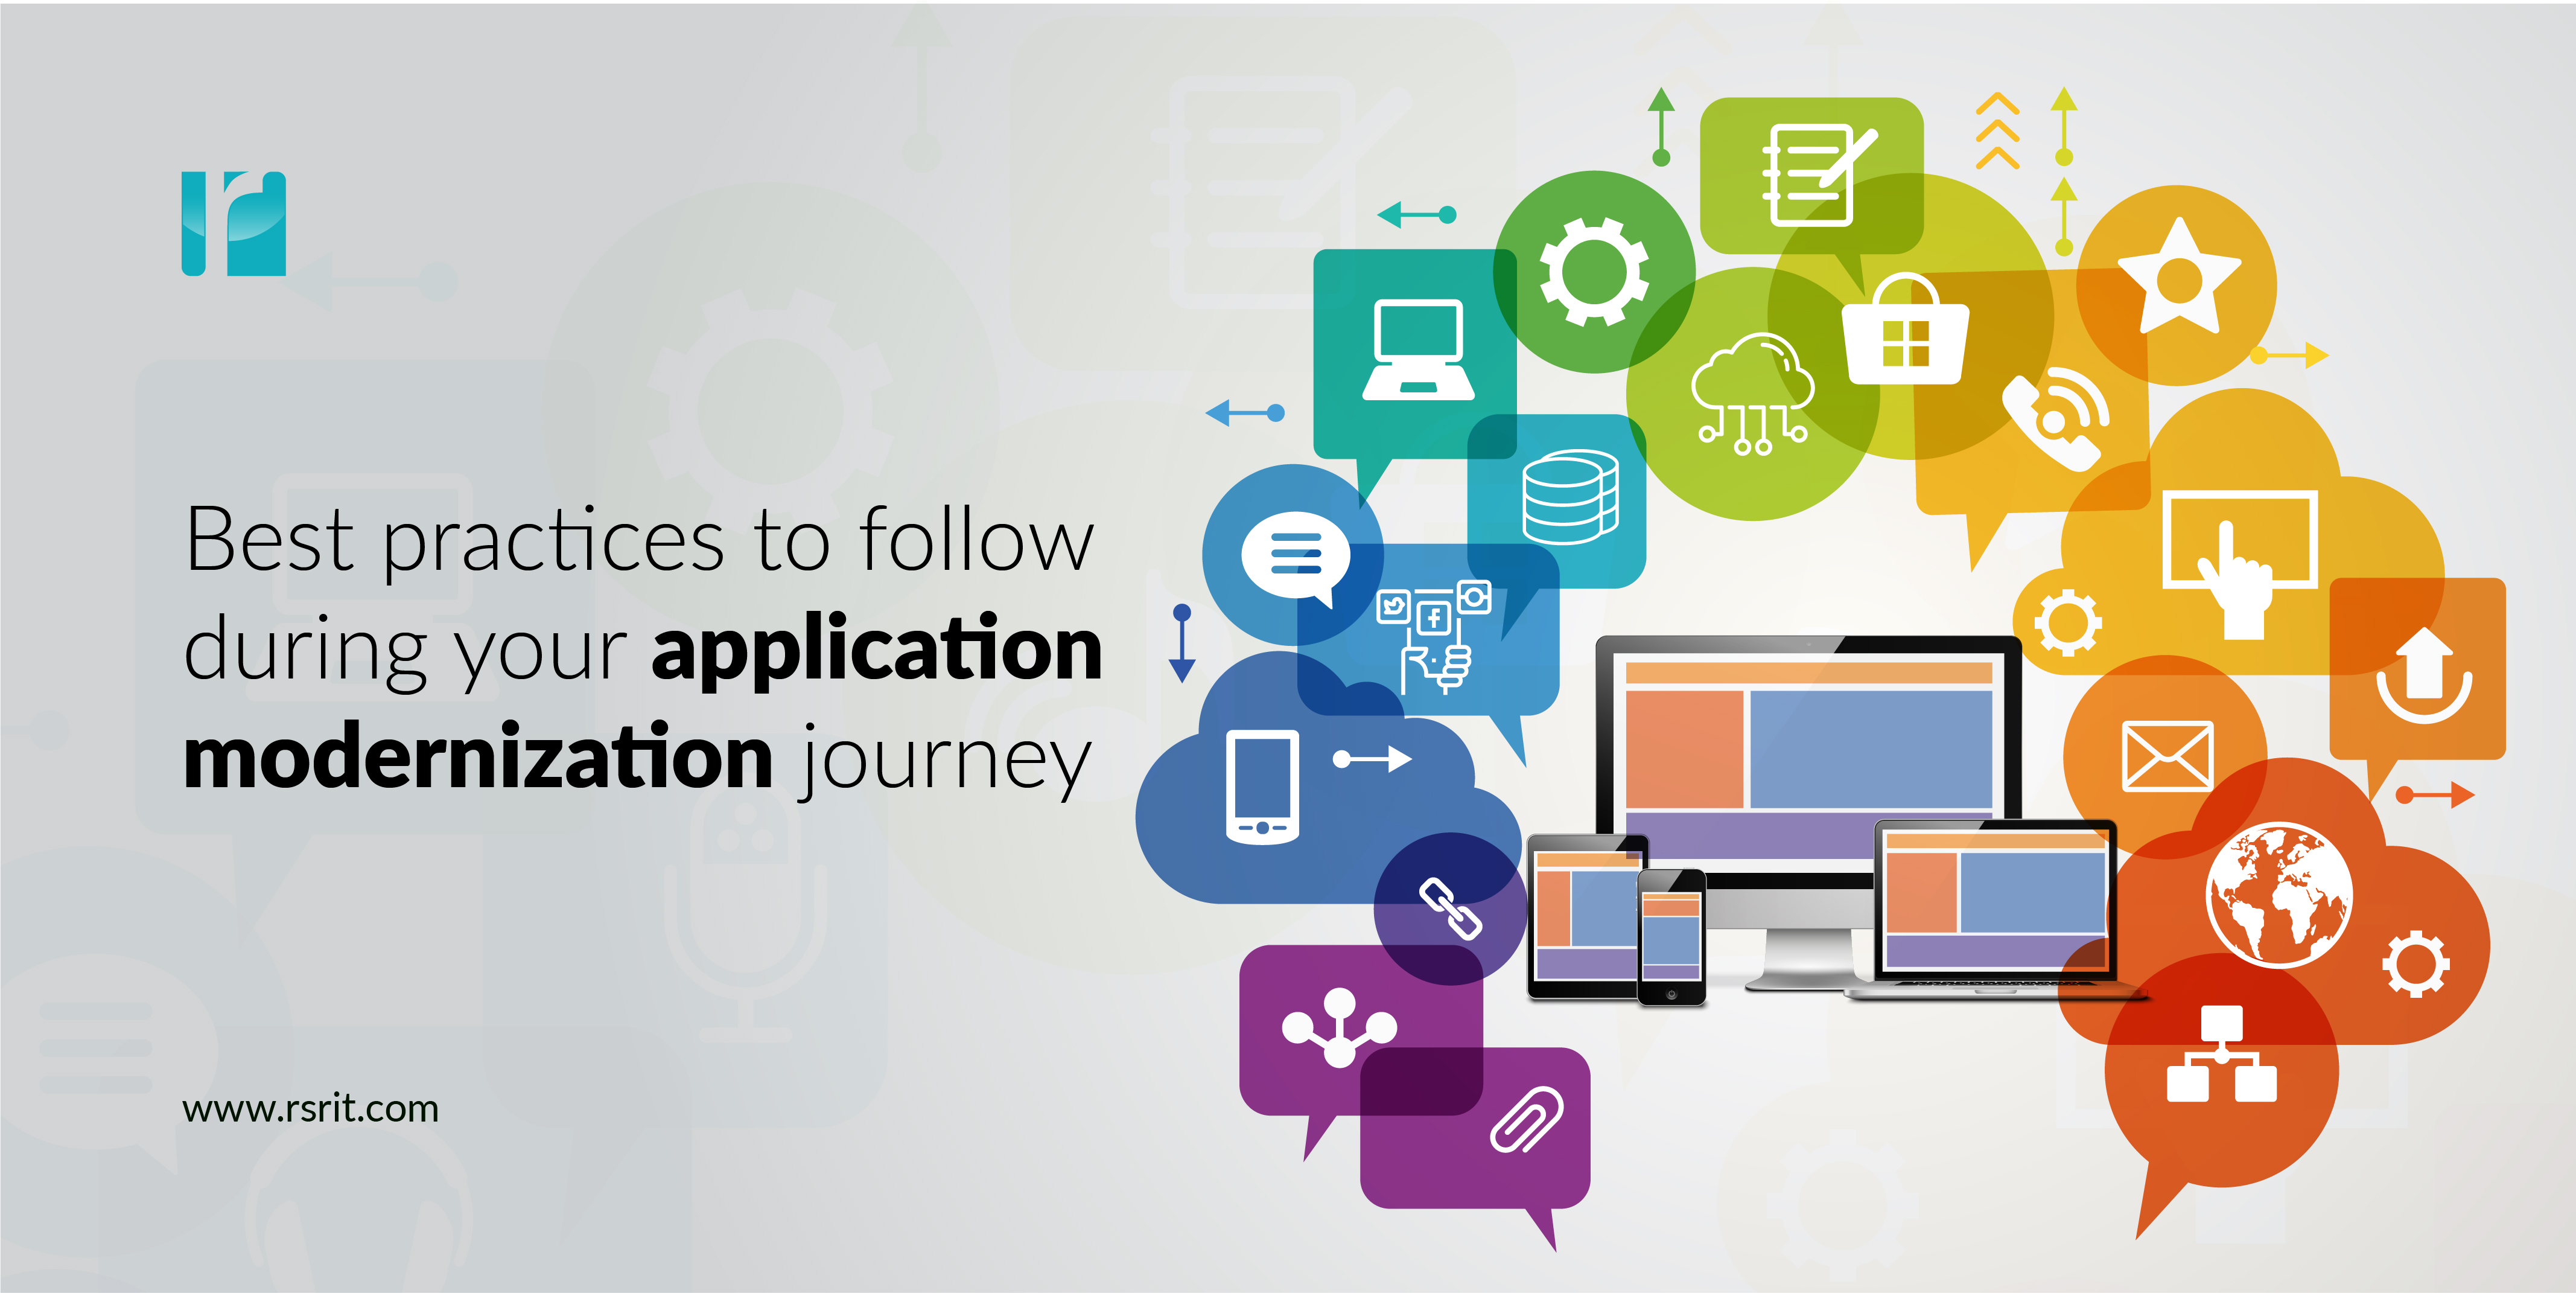 Best practices to follow during your application modernization journey